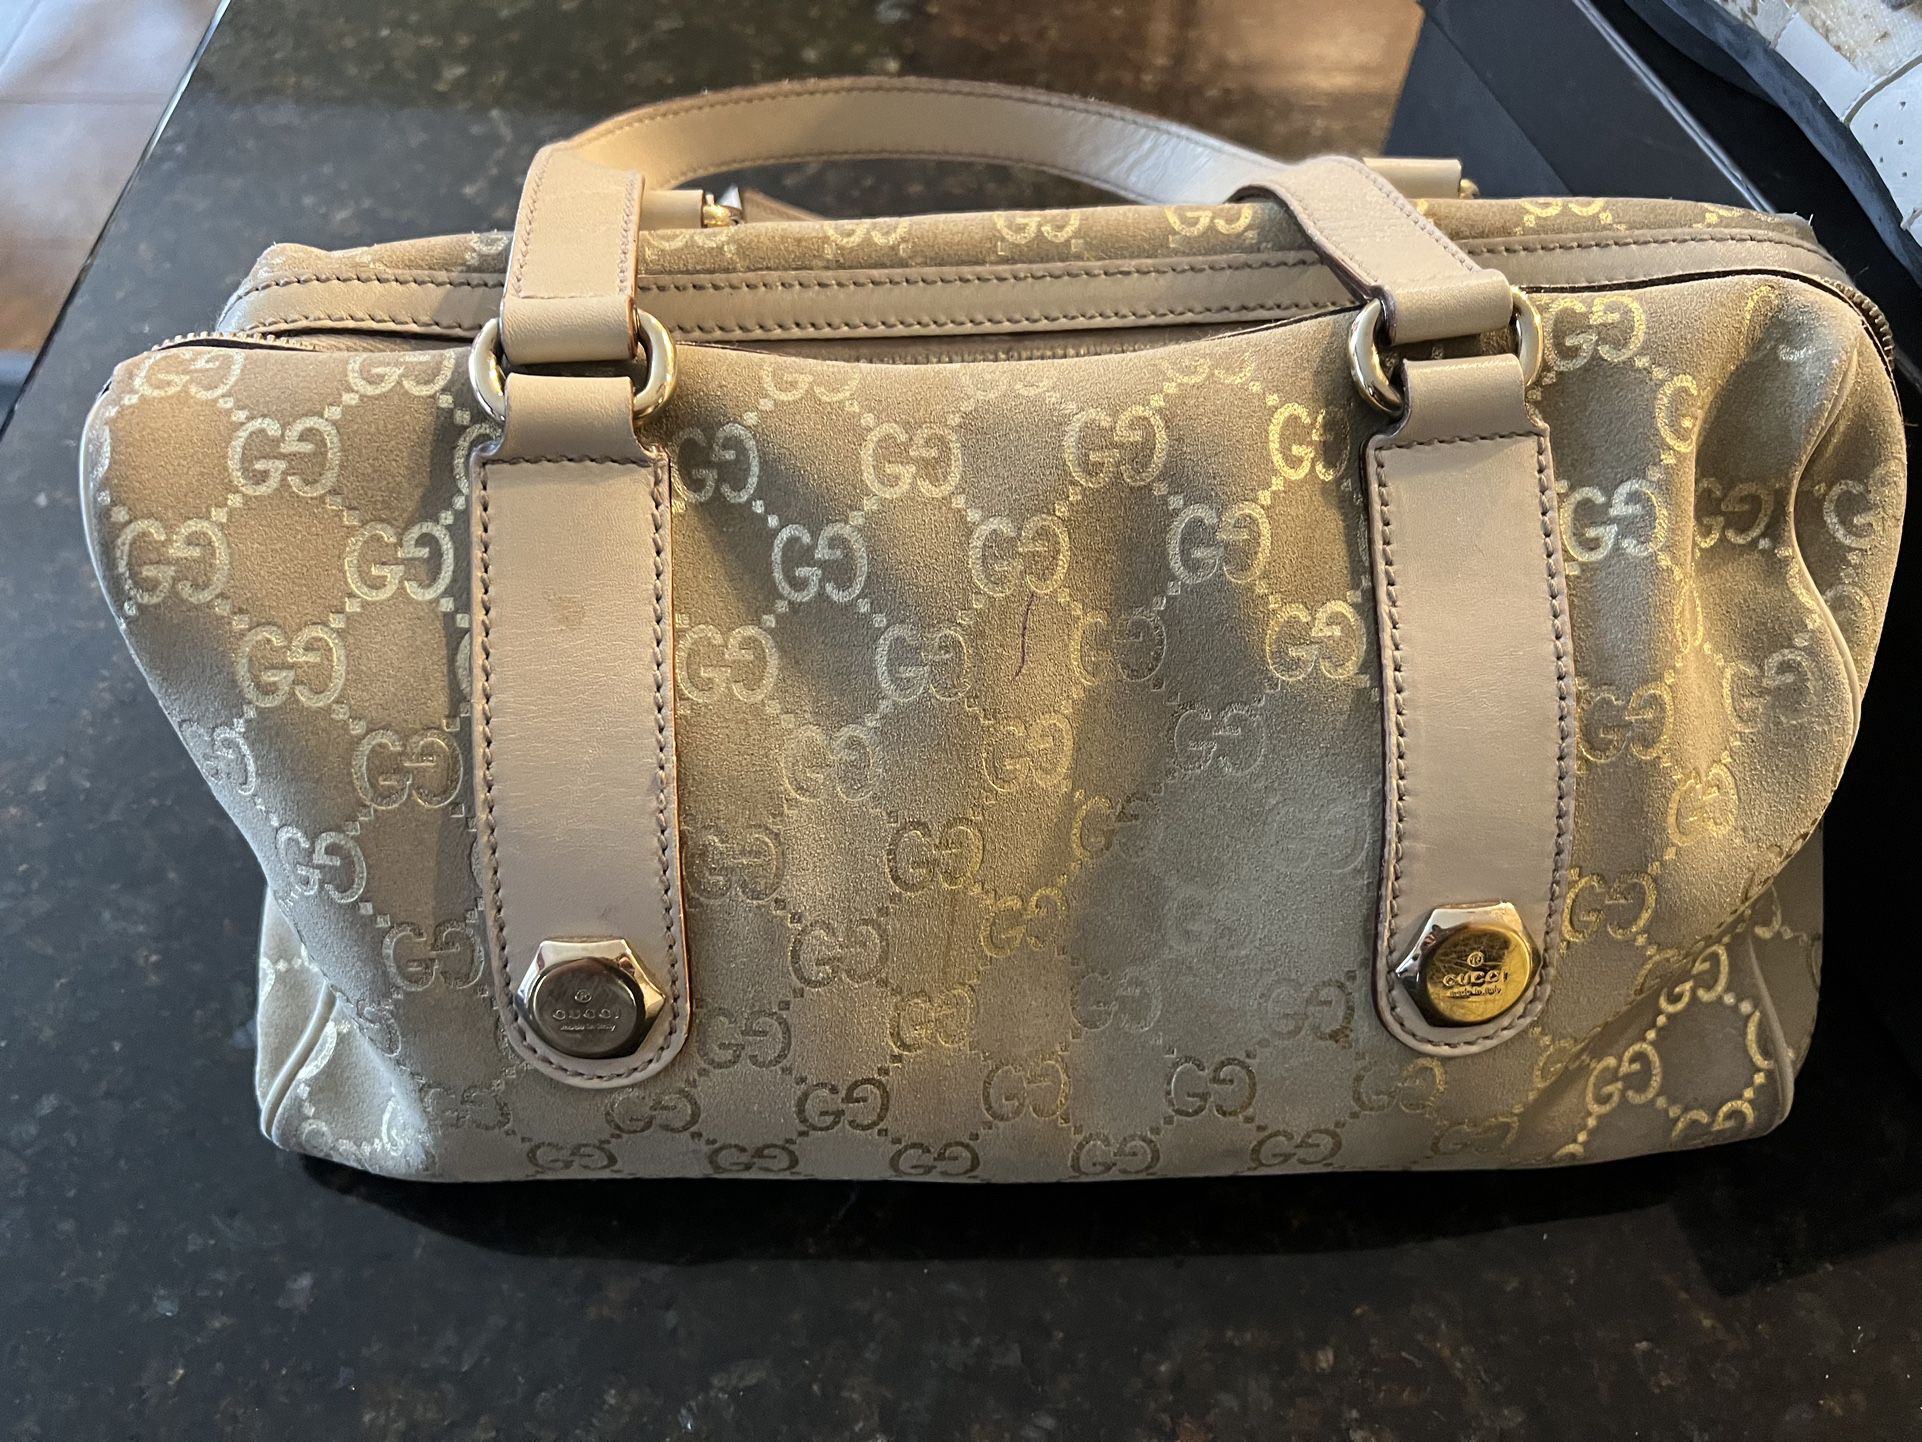 AUTHENTIC GUCCI BAG & Matching Sneakers for Sale in Concord